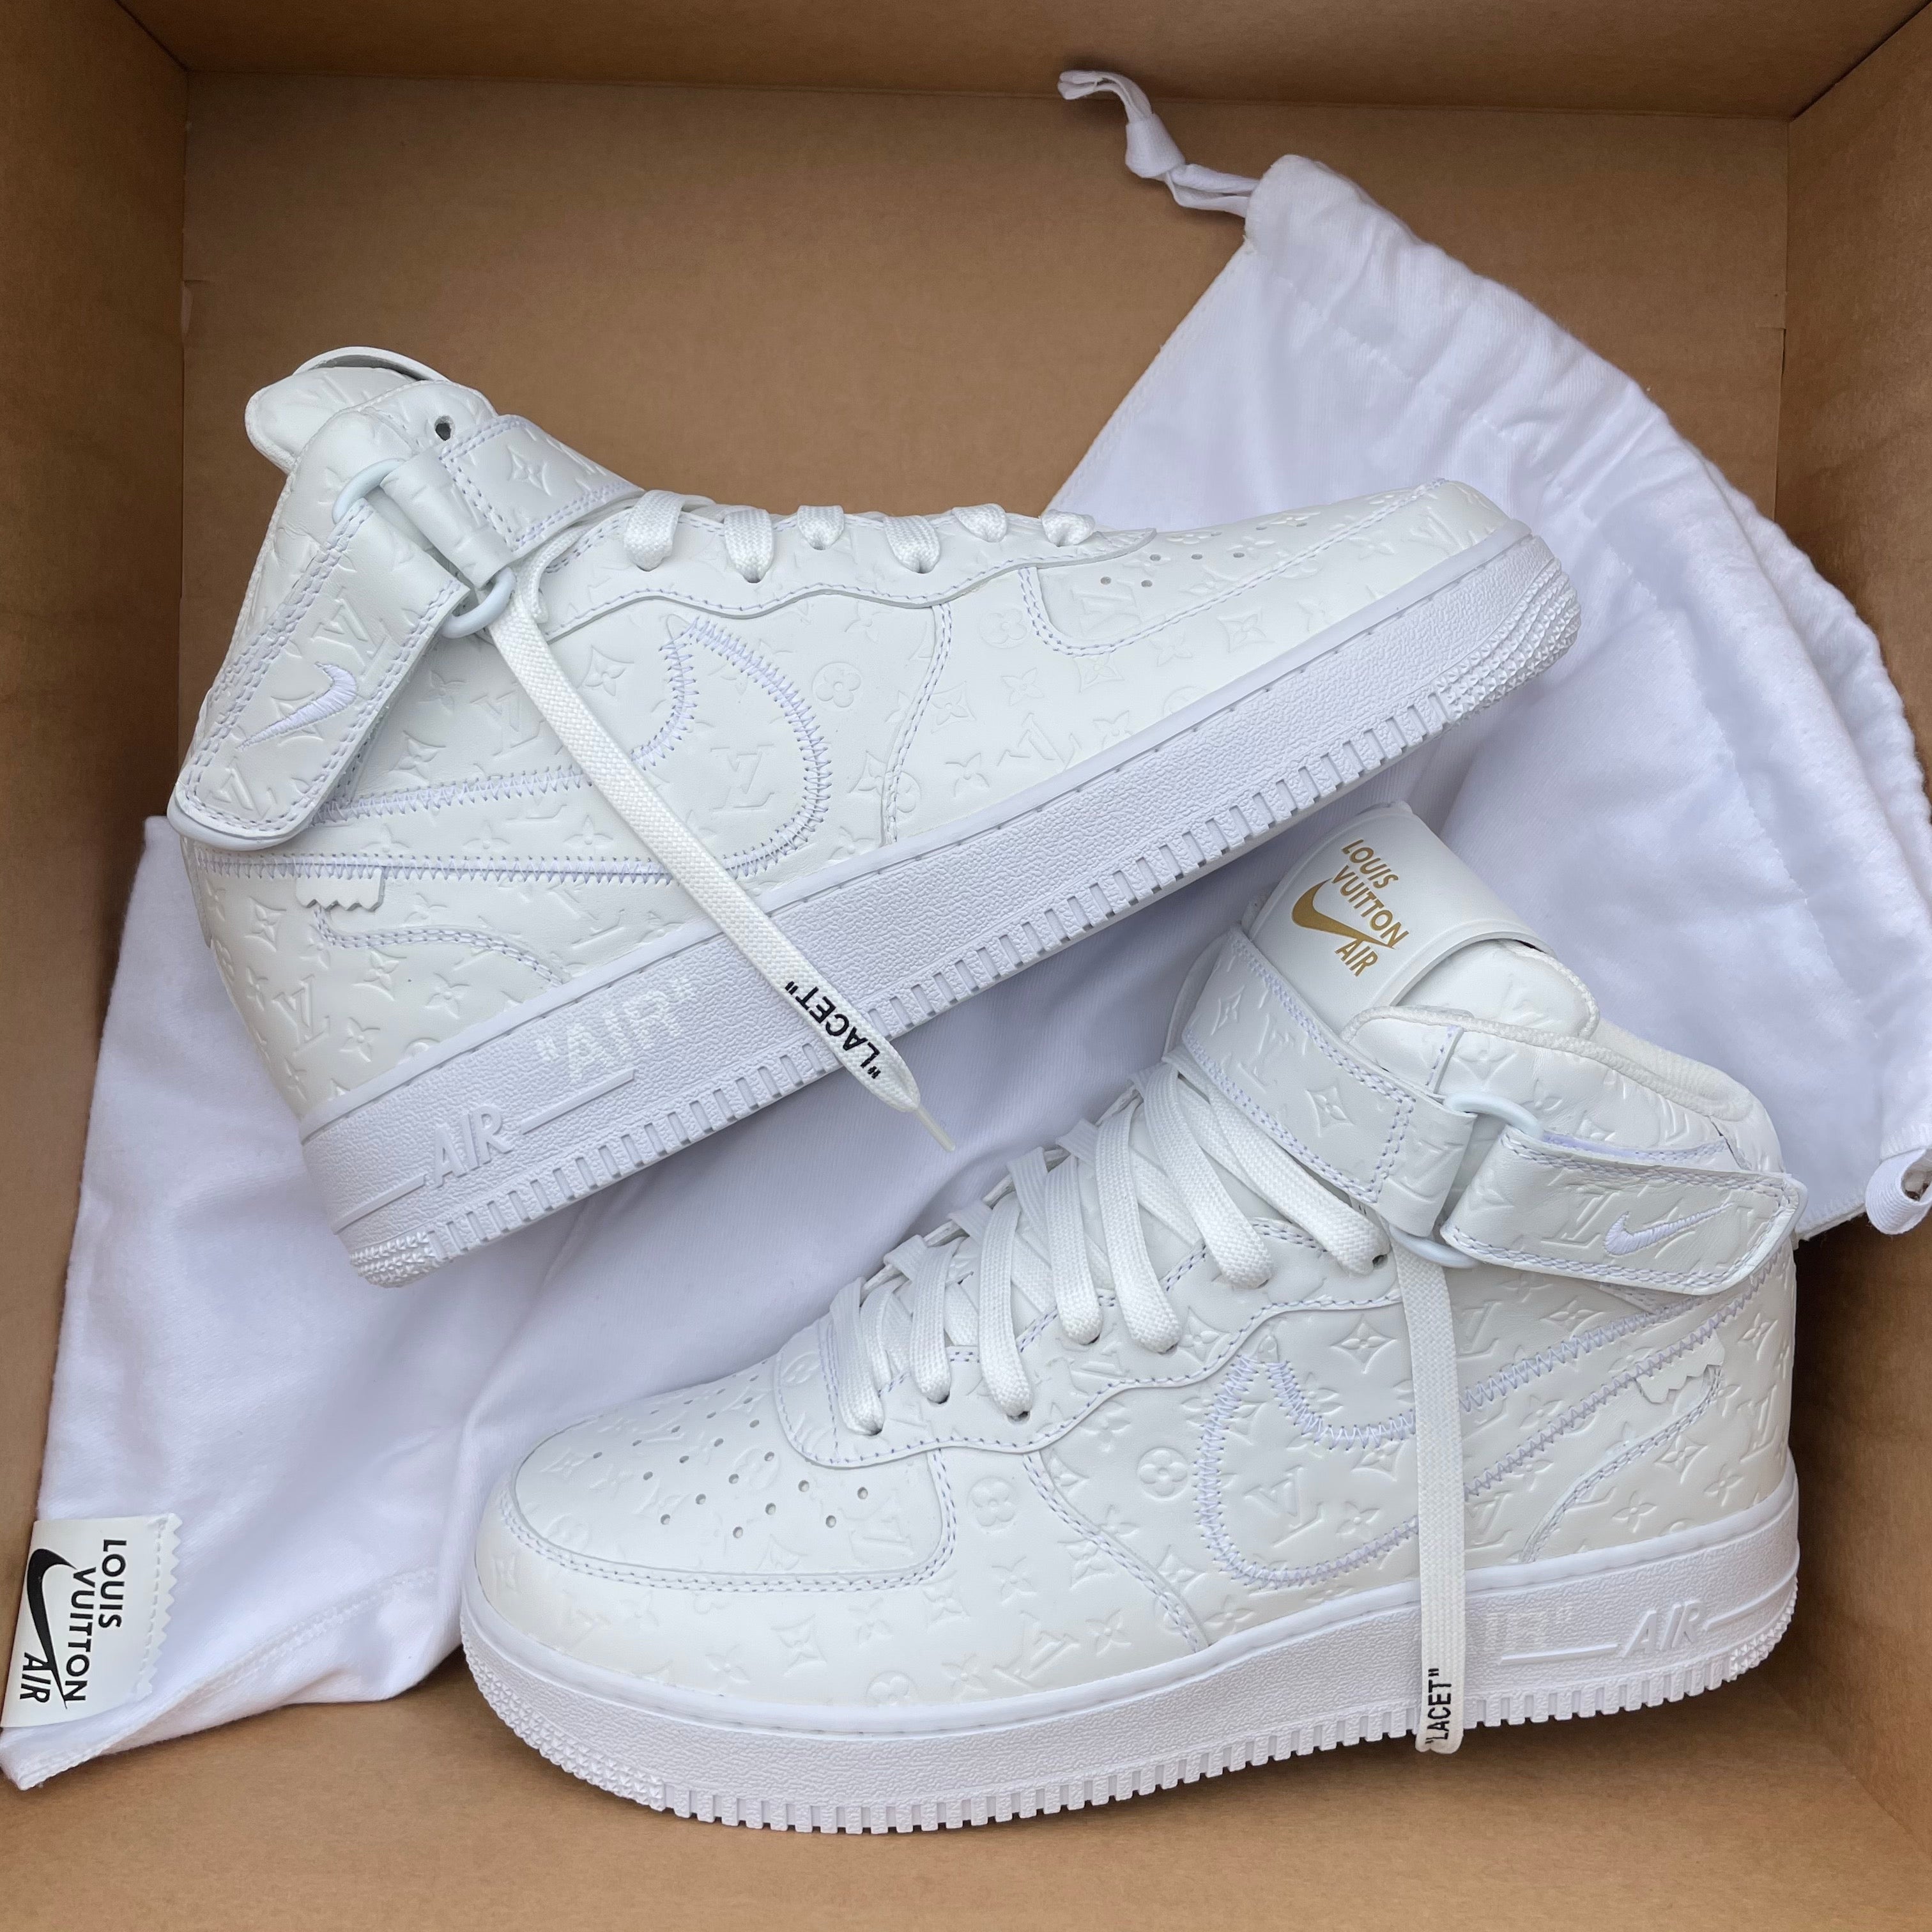 Louis Vuitton Nike Air Force 1 Mid White 2022 (US8.5) – Curated by Charbel